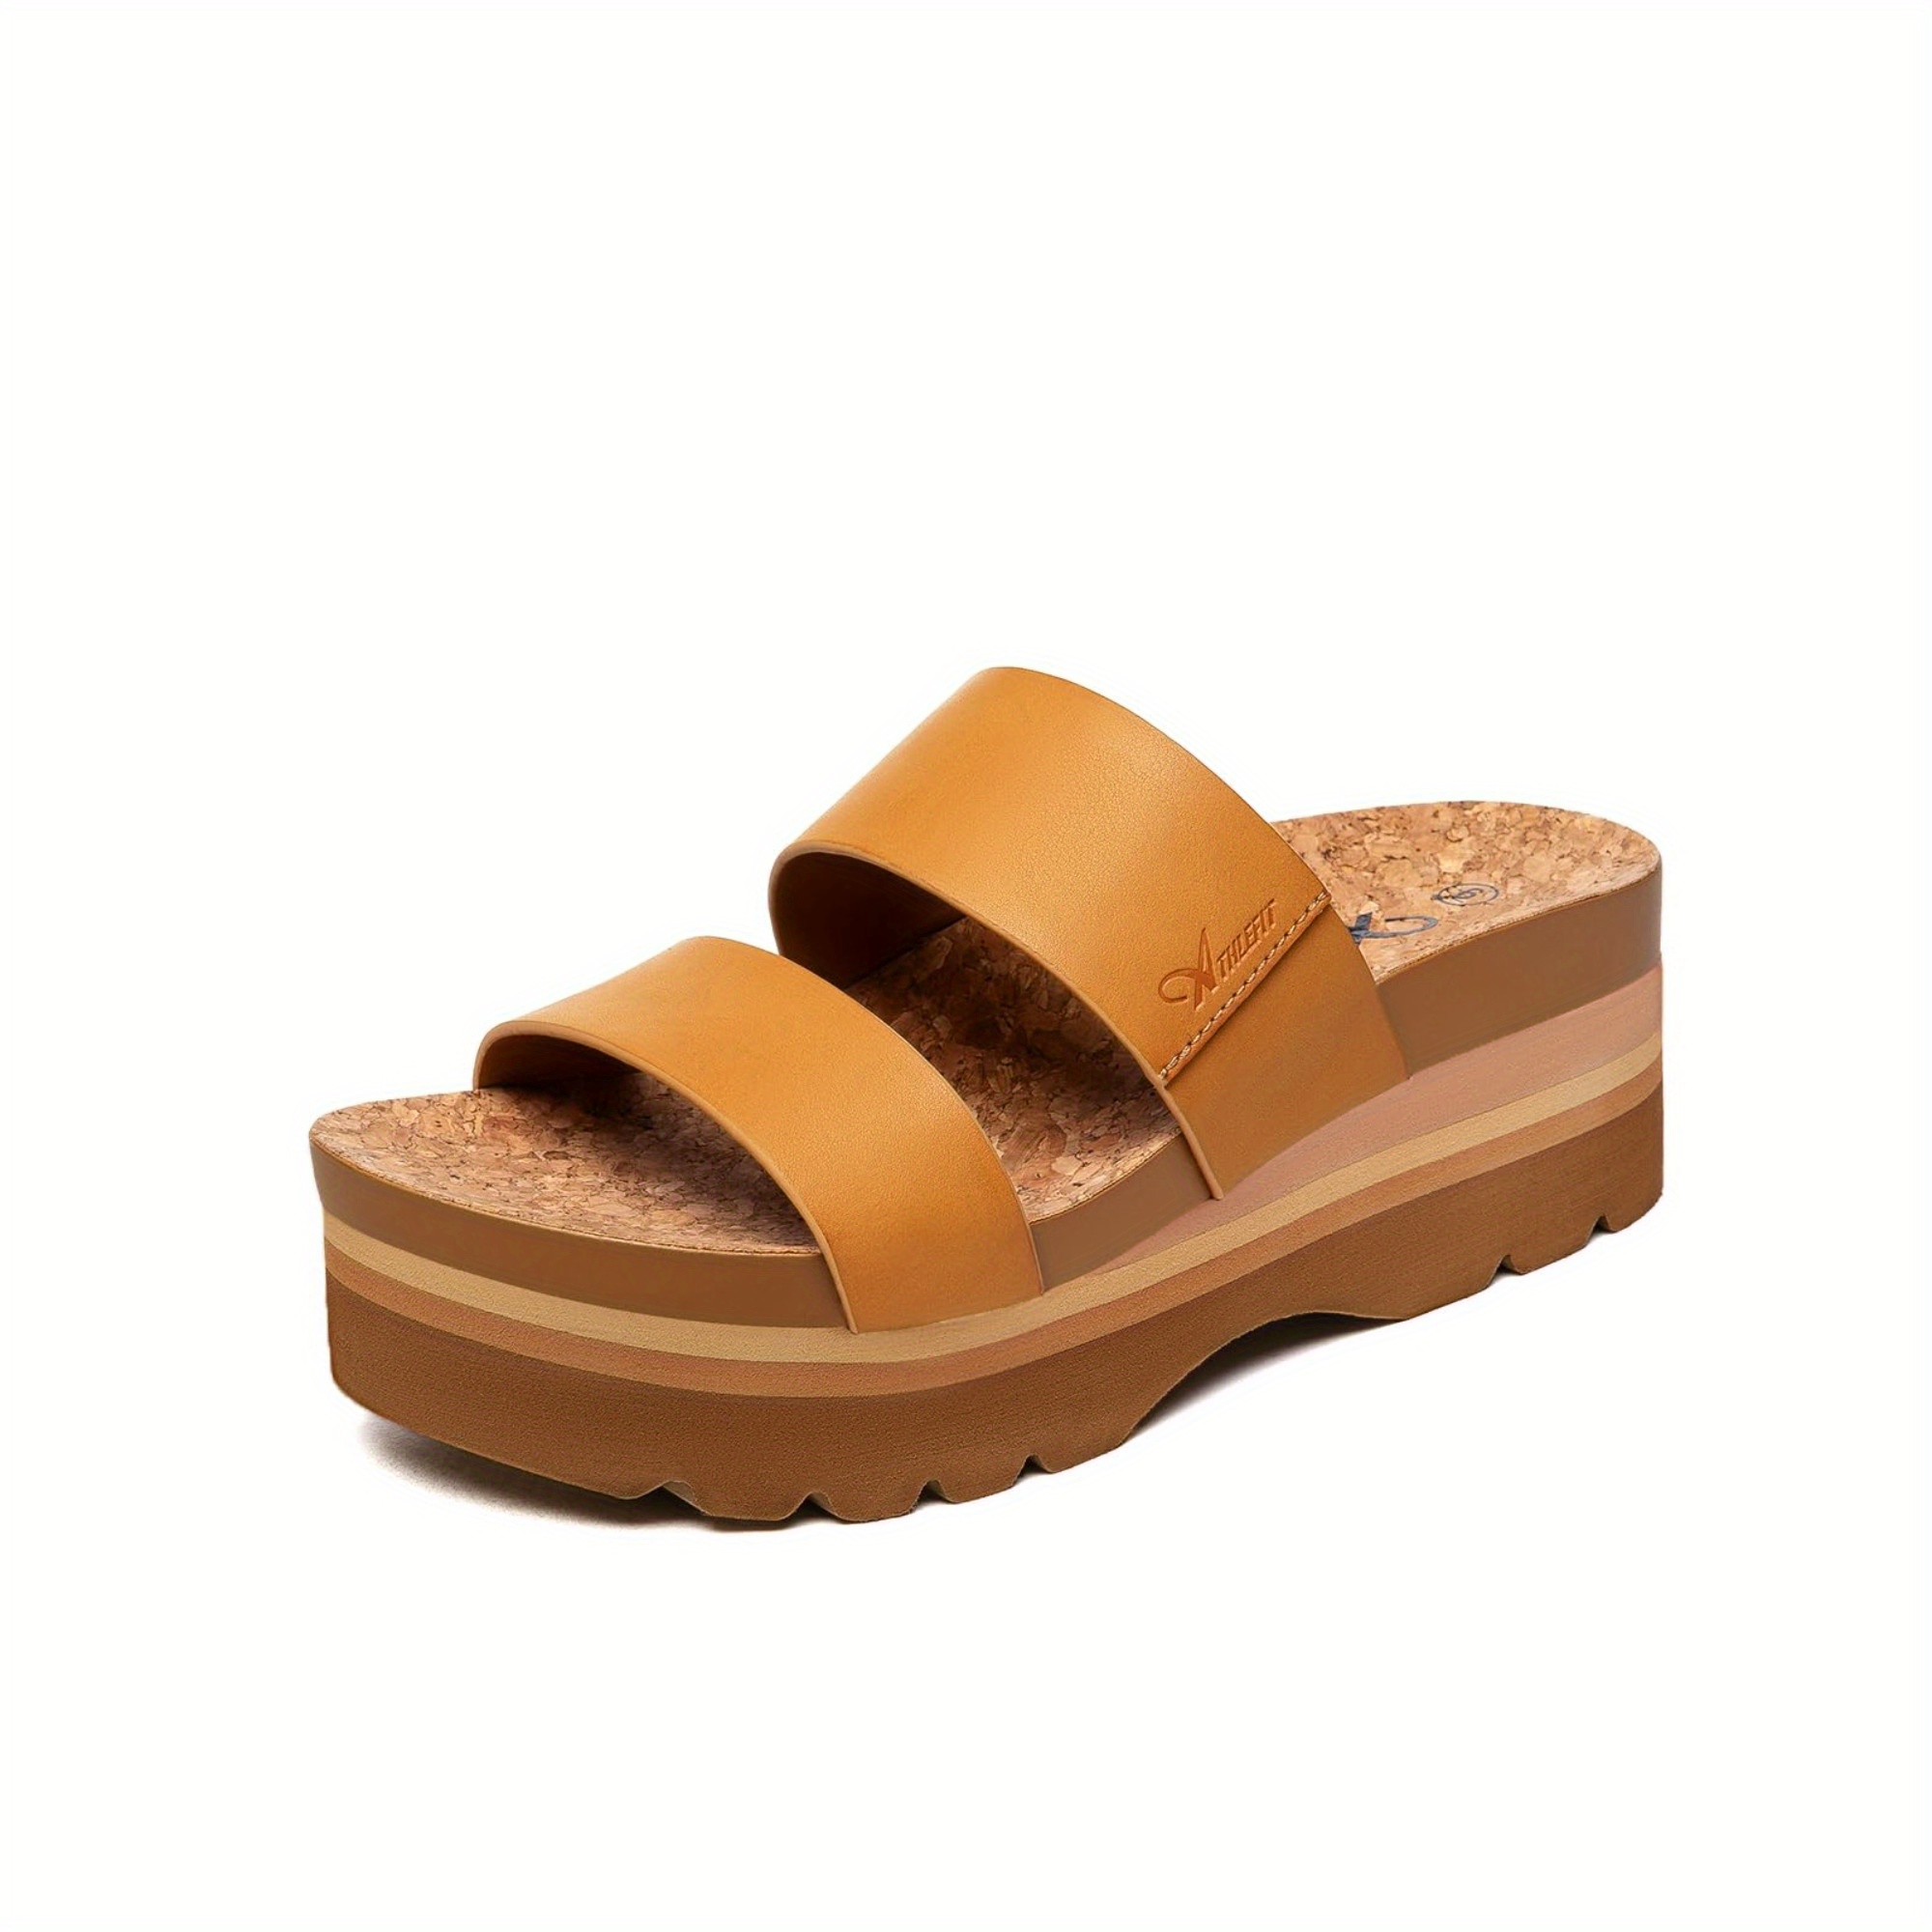 

Higher Platform Sandals, Arch Support Beach Slides For Woman, Orthotic Summer Causal Cork Footbed Slip On